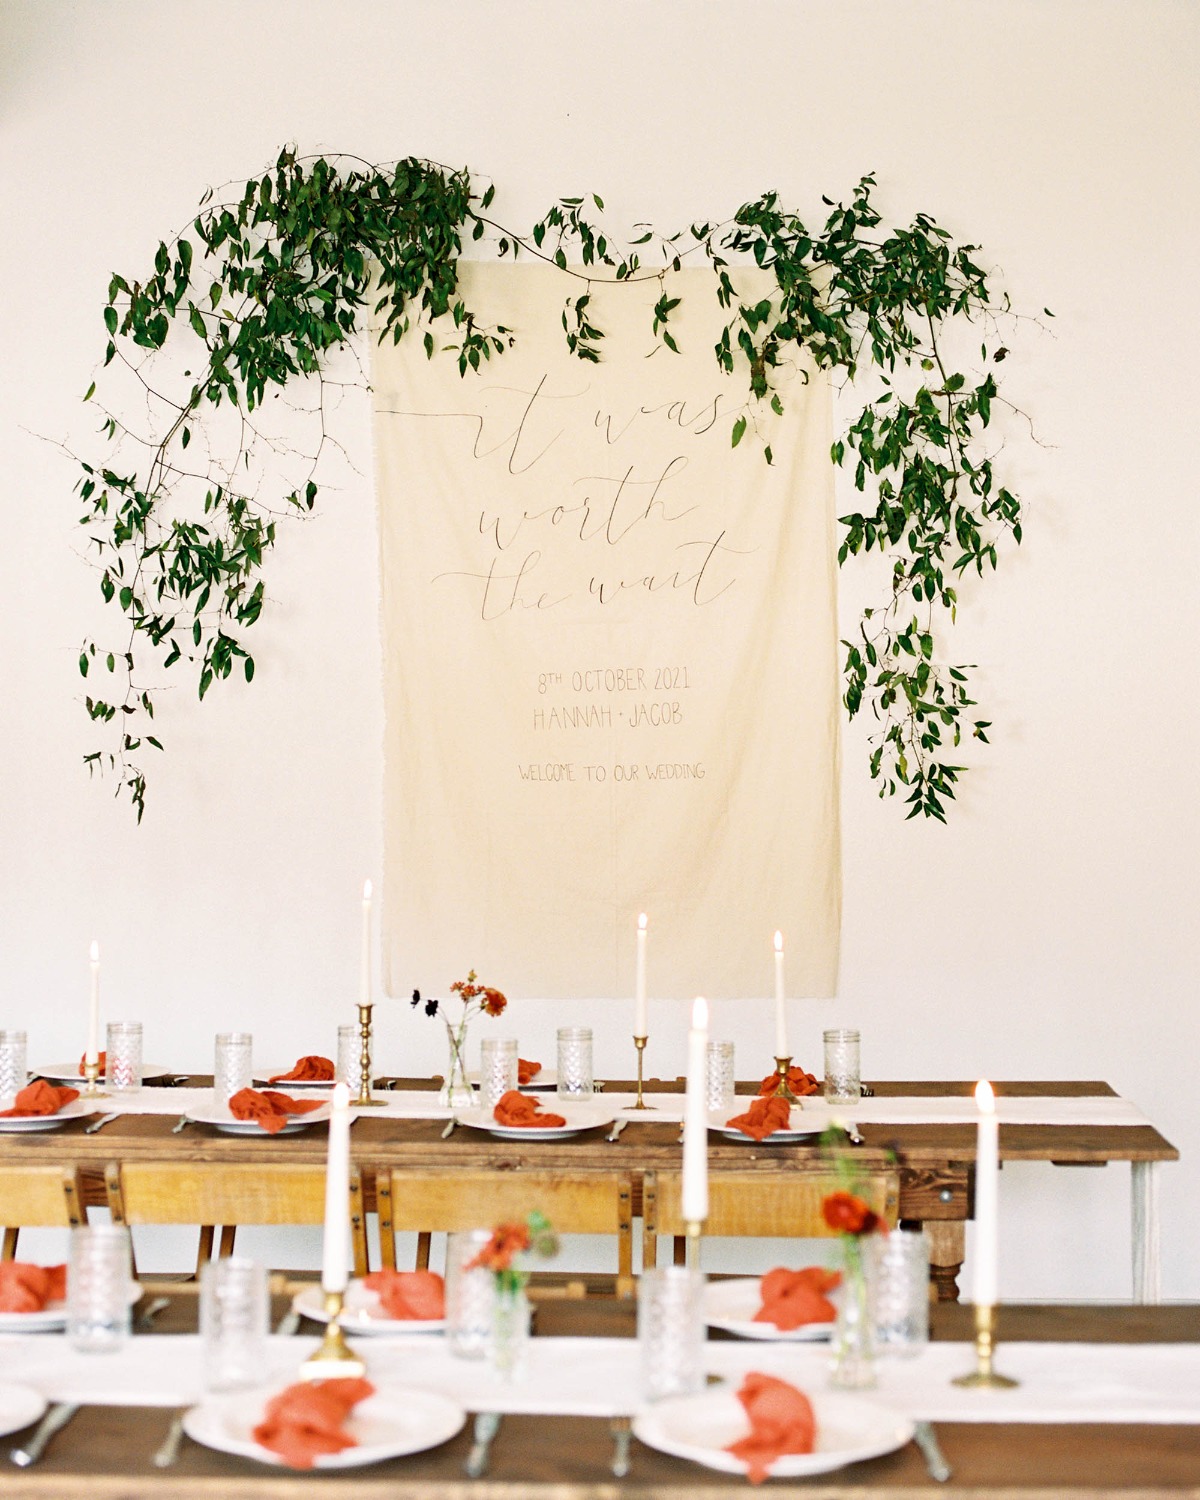 Stunning Fall Wedding With A Donut Wall...Need We Say More?